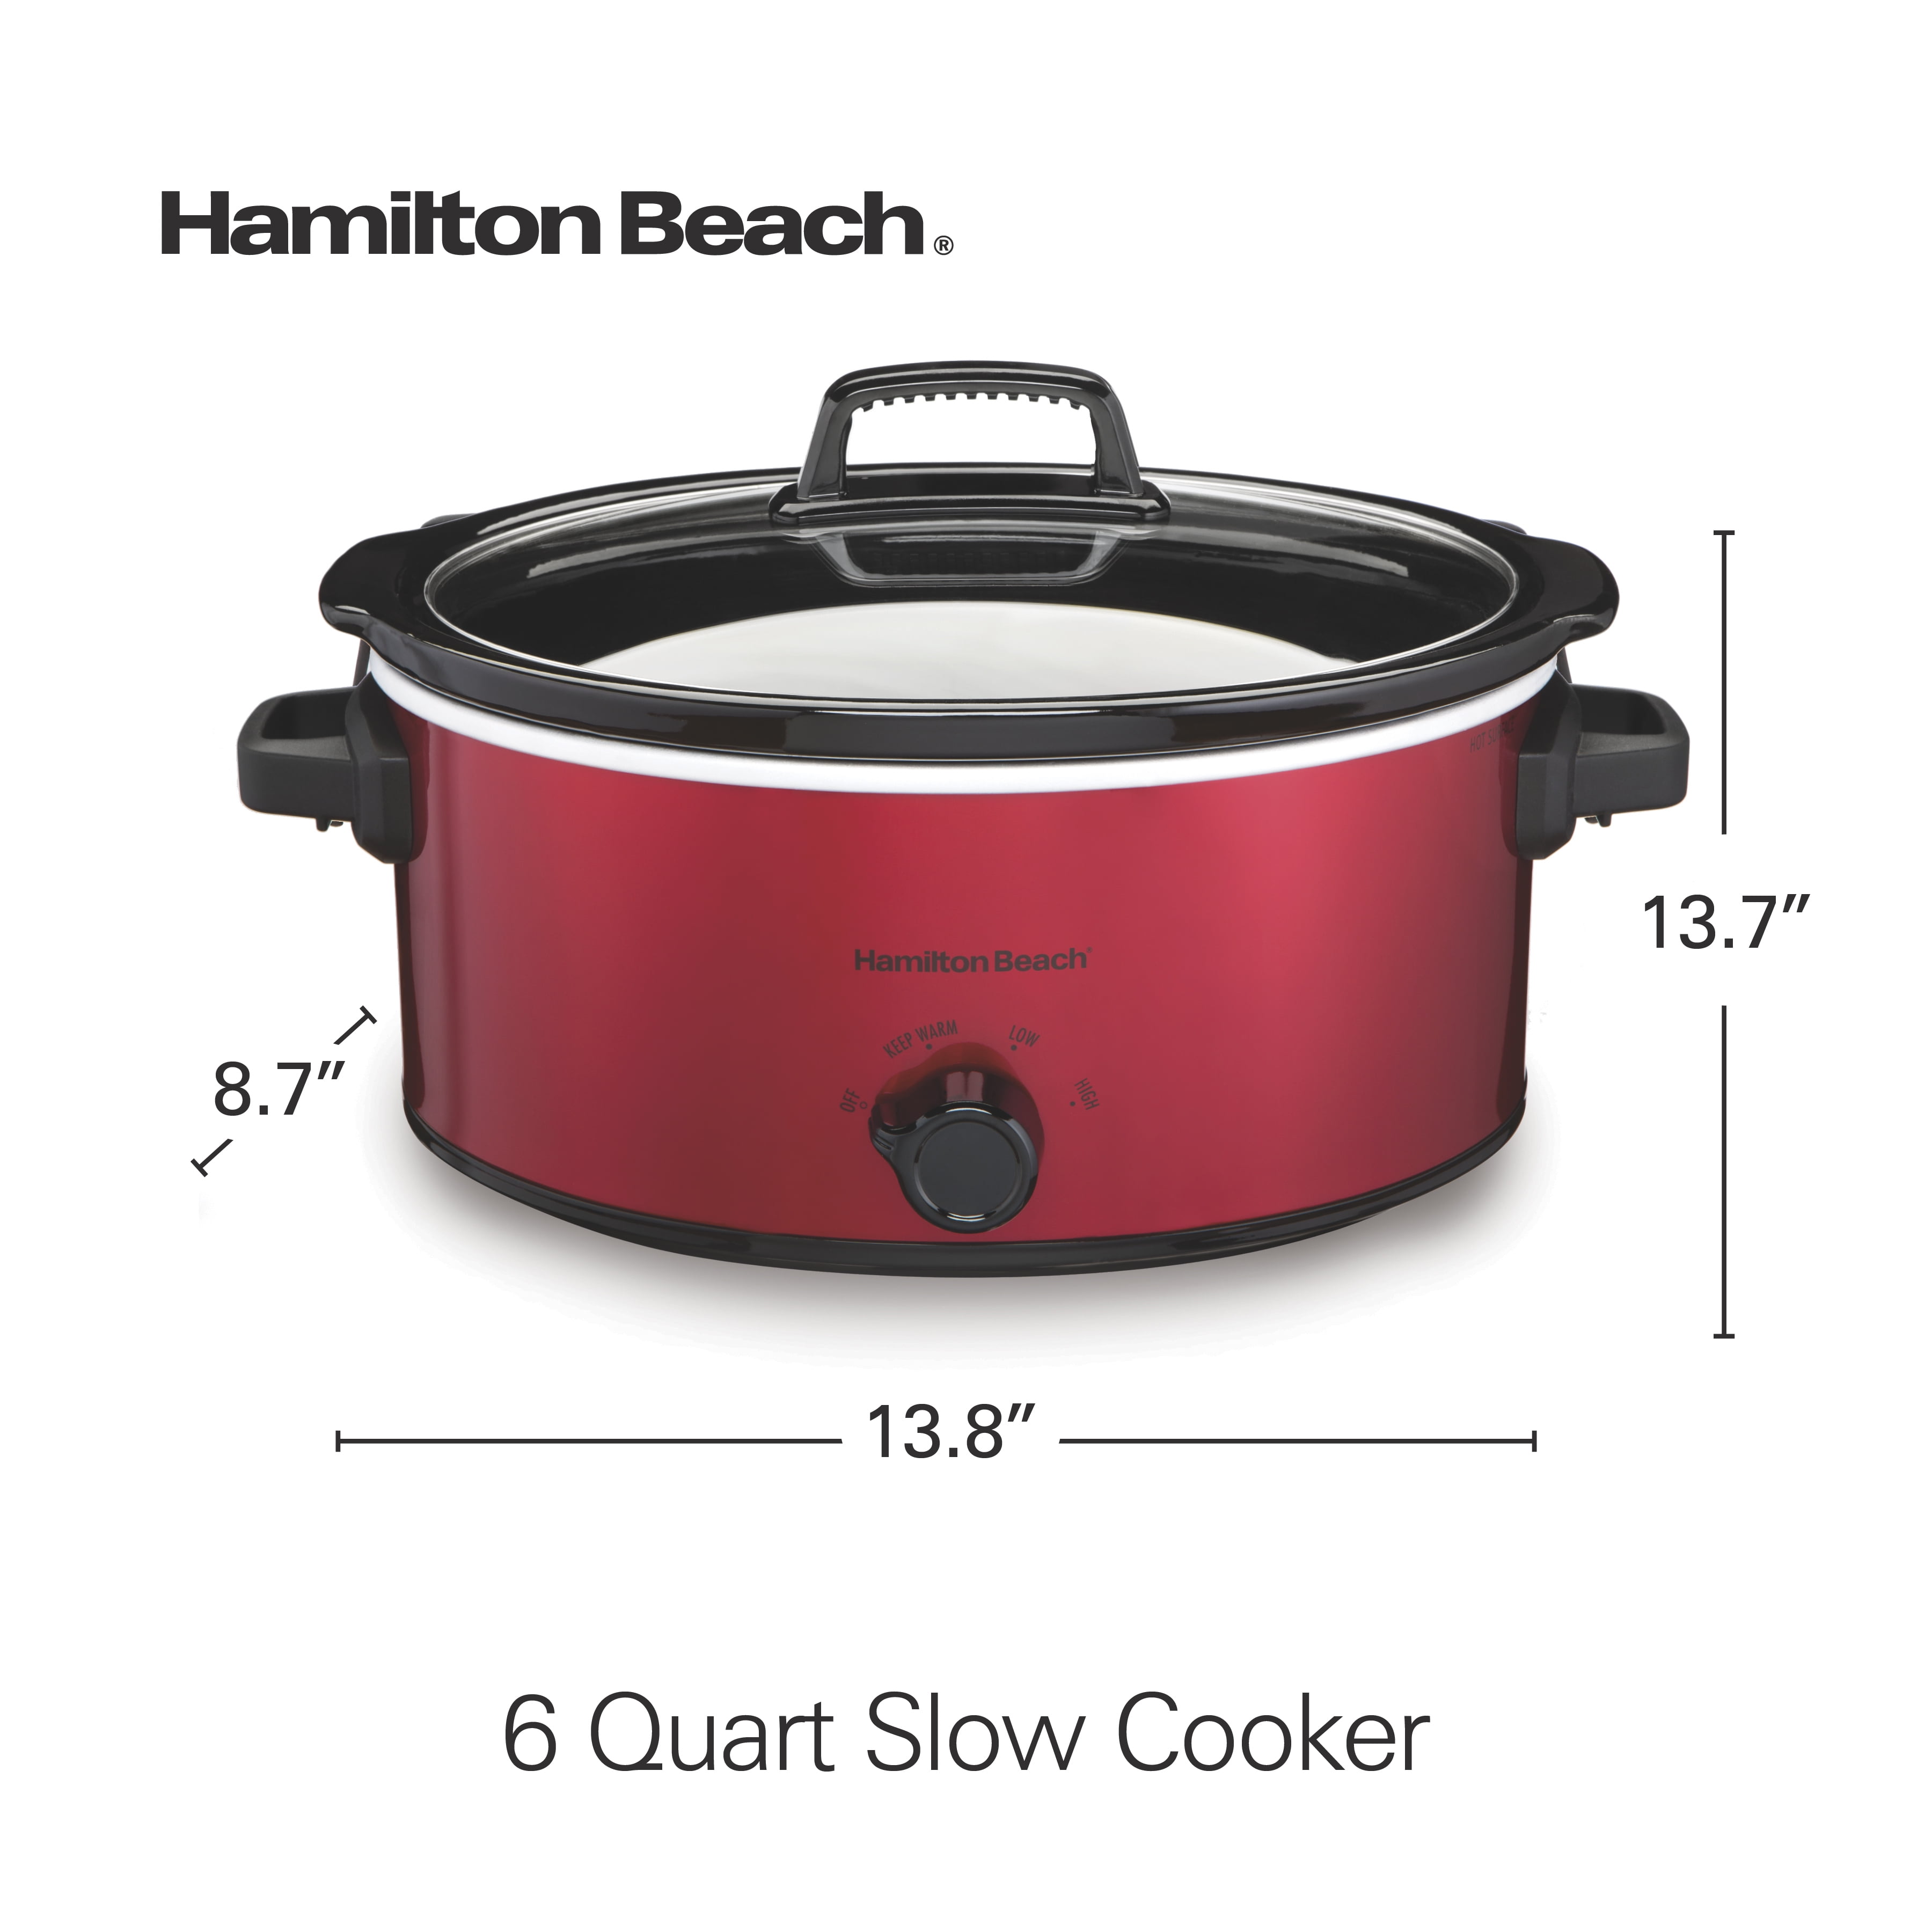 Golkcurx Double Layer Slow Cooker Bag for 6-8 Quart Oval Crockpot and Hamilton Beach Models, with Padded Adjustable Strap, Top Zip Compartment, and